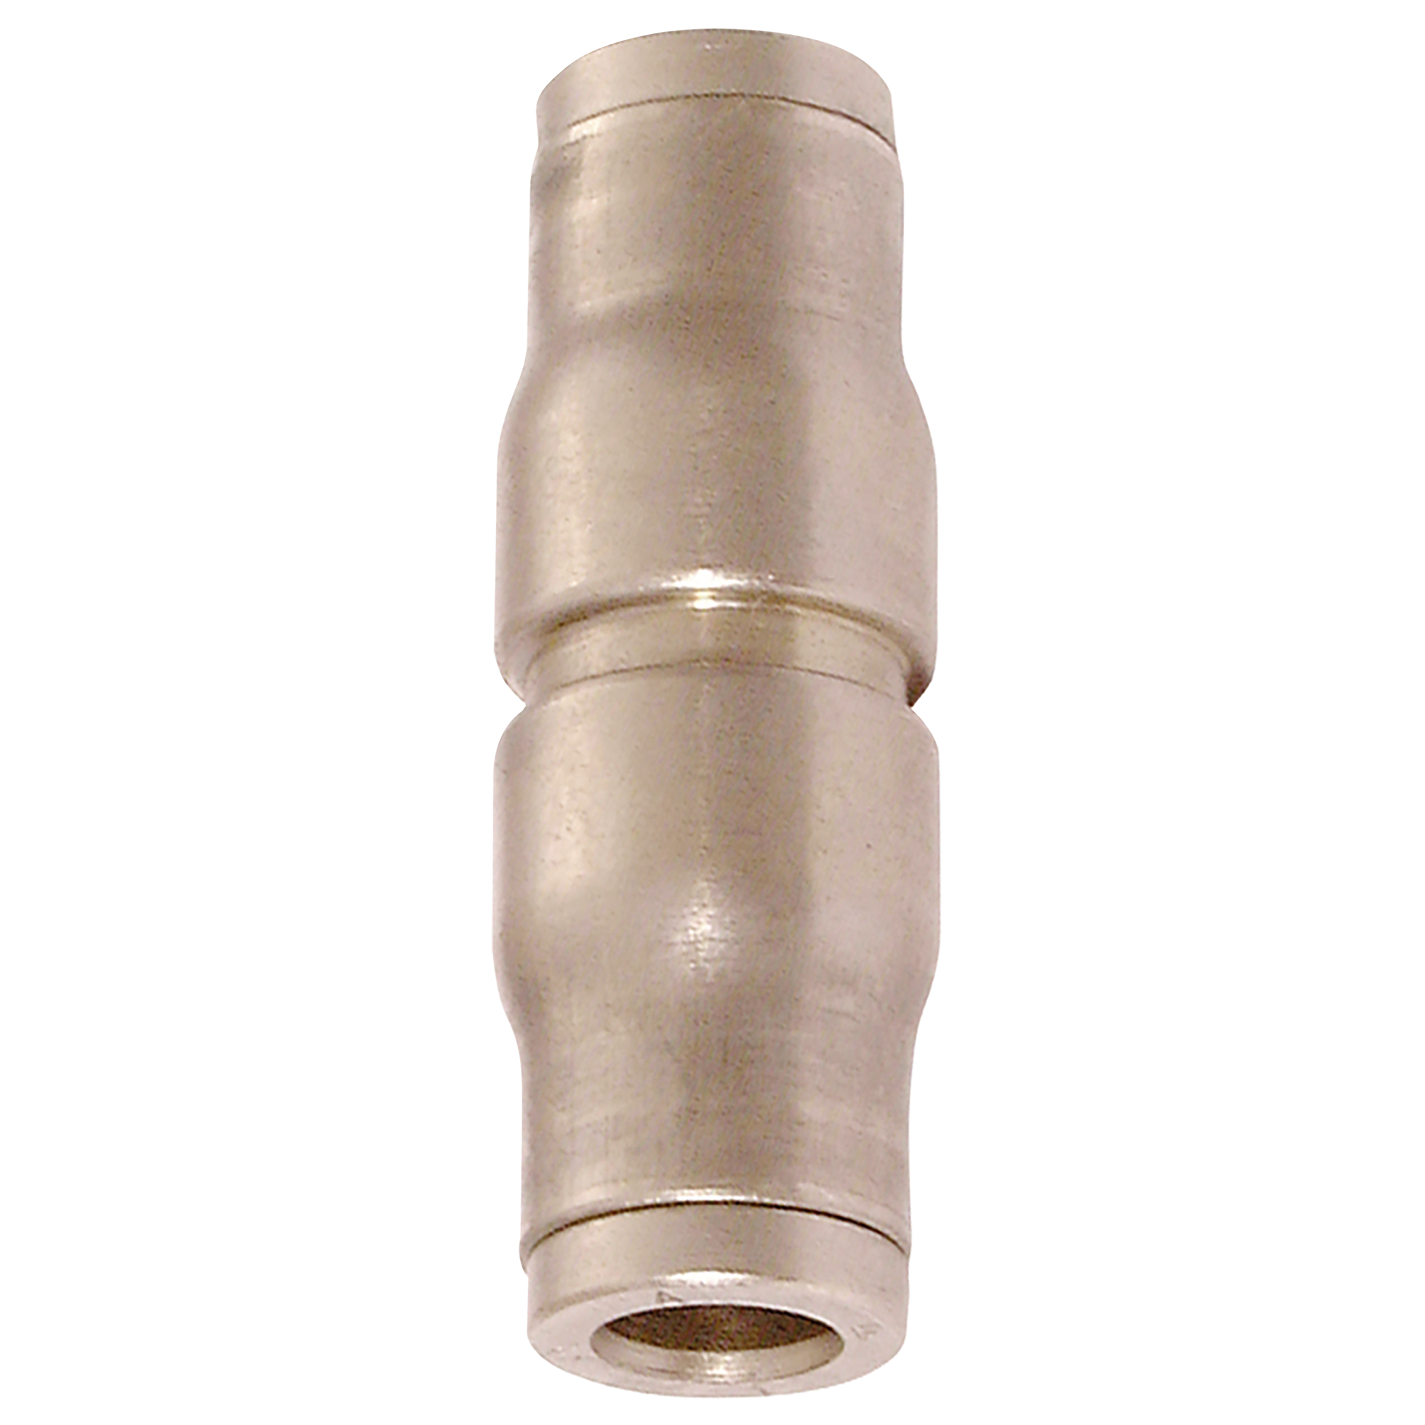 12MM EQUAL TUBE TO TUBE CONNECTOR